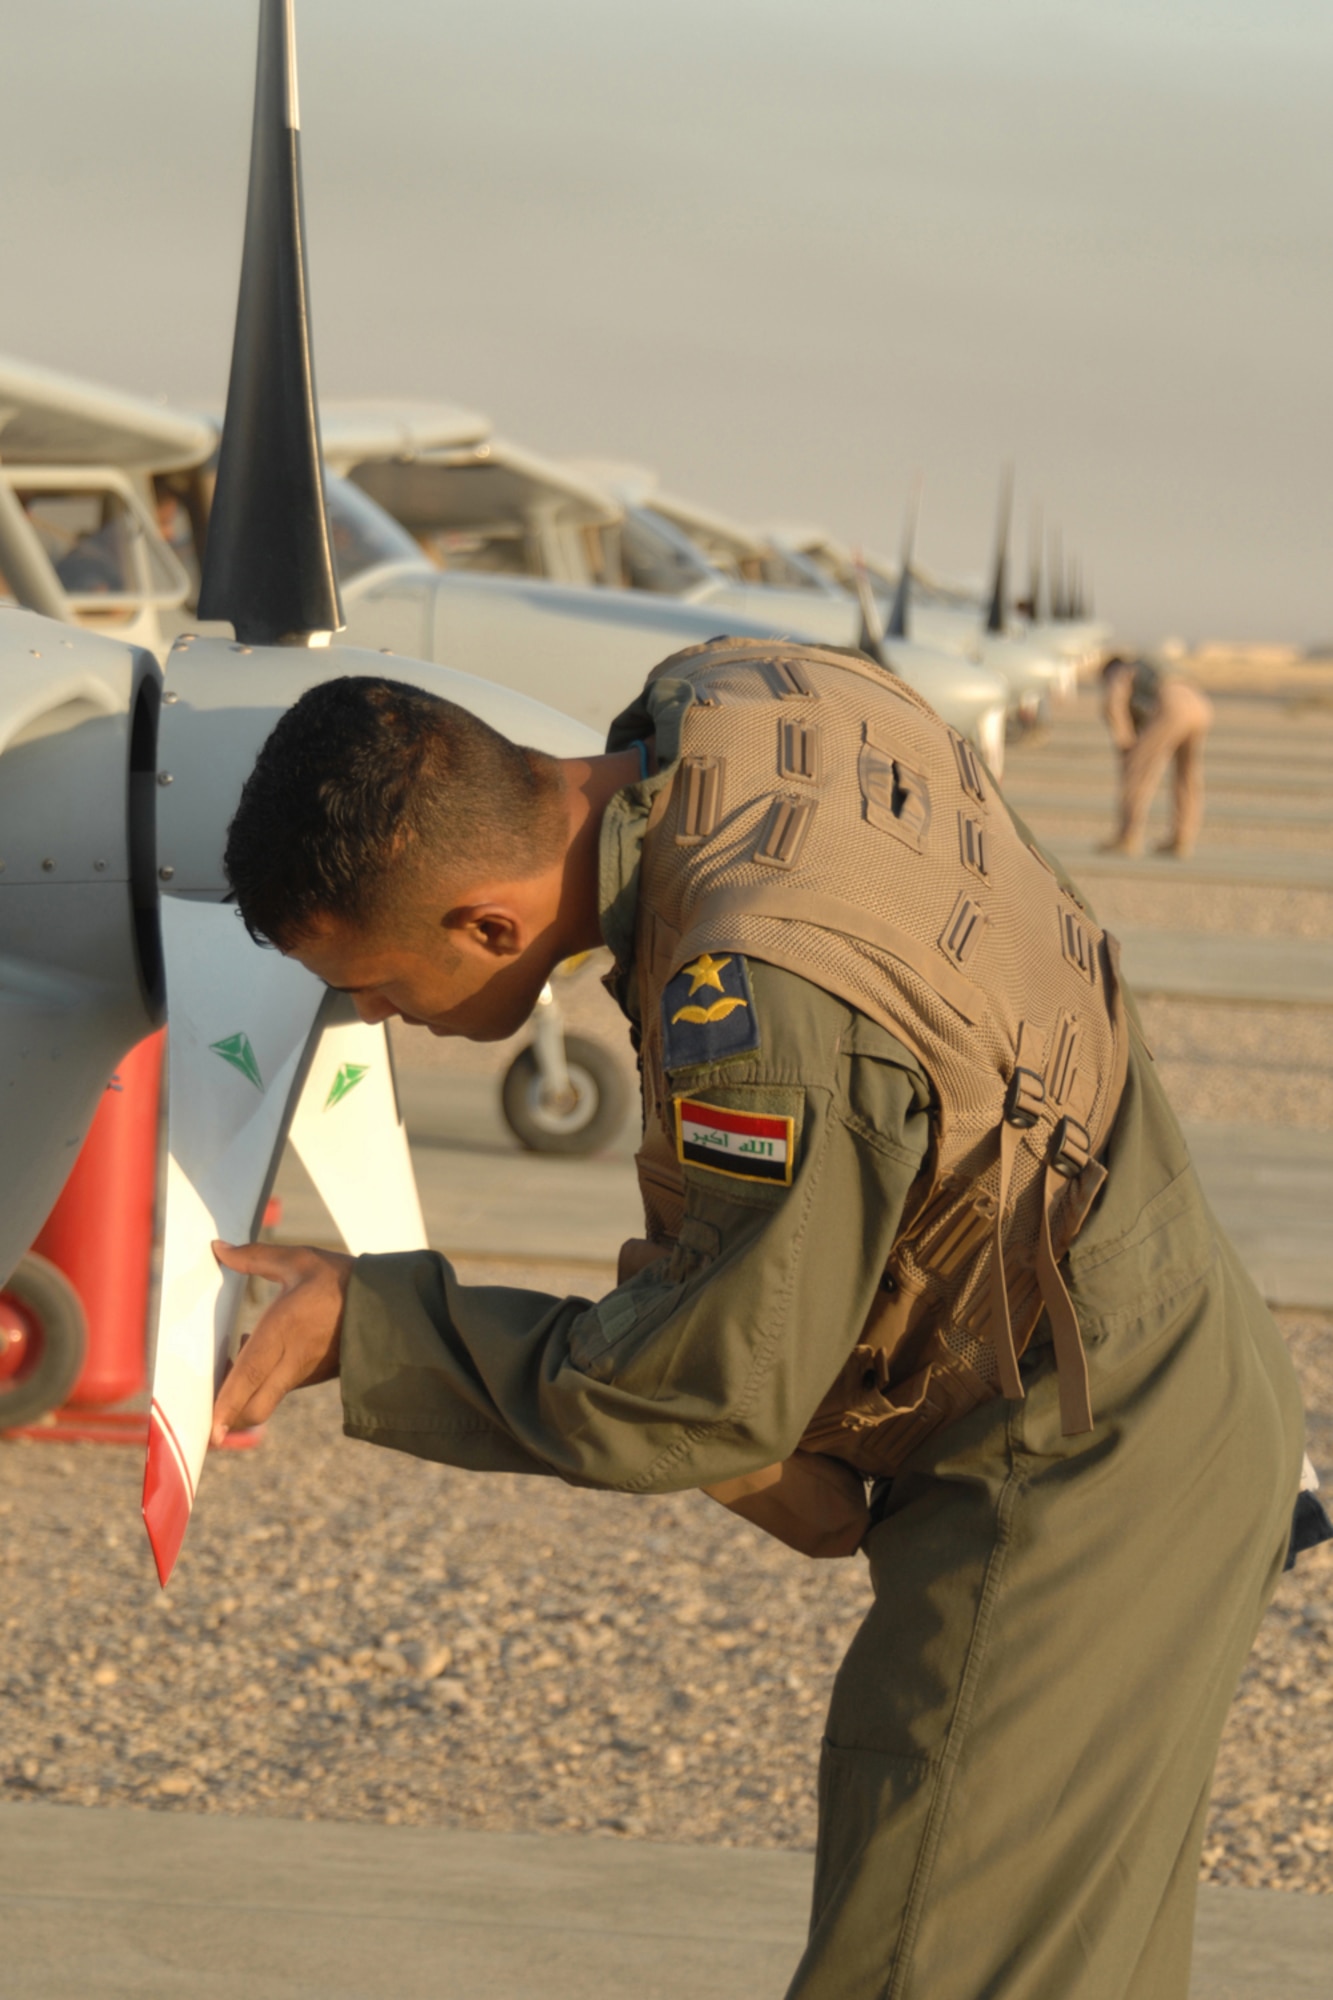 KIRKUK REGIONAL AIR BASE, Iraq -- An Iraqi air force student pilot checks the prop of a Cessna 172 Skyhawk before an early morning training flight here Sept. 1.  The pilot is part of the 52nd Expeditionary Flying Training Squadron's effort to help train the next generation of Iraqi pilots.  The newest class more than doubled the squadron's student population as they began the year-long program.  The new pilots underwent medical and physical tests during the application process and were also required to pass an English proficiency course. Upon graduation, the Iraqi pilots are assigned to units that either conduct an airlift mission with C-130 aircraft, or an intelligence, surveillance and reconnaissance mission with King Air 350, Cessna 208 and CH-2000 aircraft. (U.S. Air Force photo/Master Sgt. Andrew Leonhard)